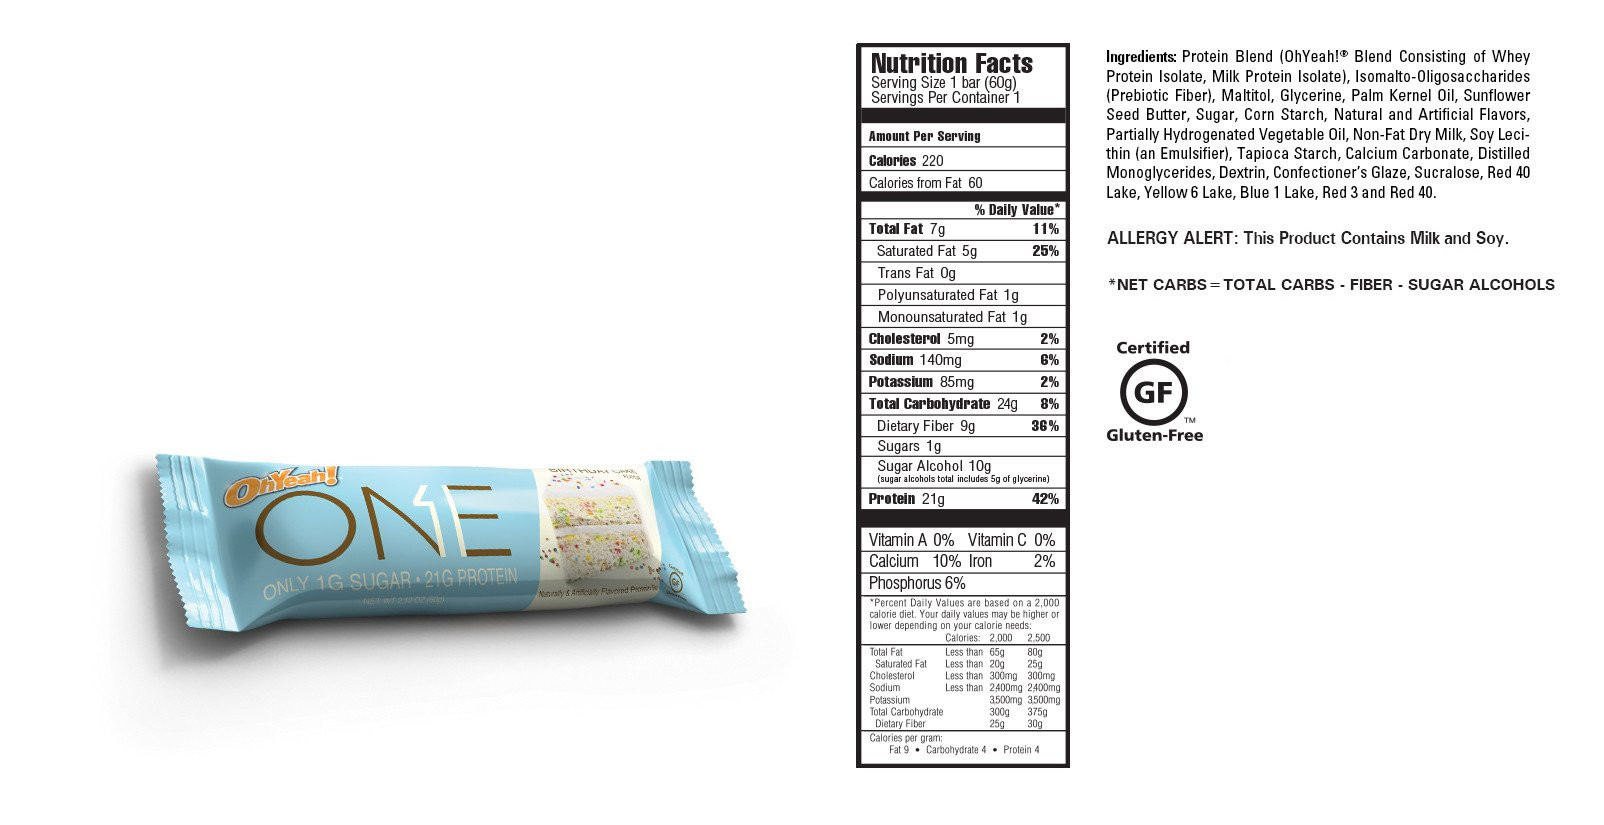 One Birthday Cake Protein Bar
 Iss Research Oh Yeah e Bar Box of 12 Bars 1g of Sugar 8